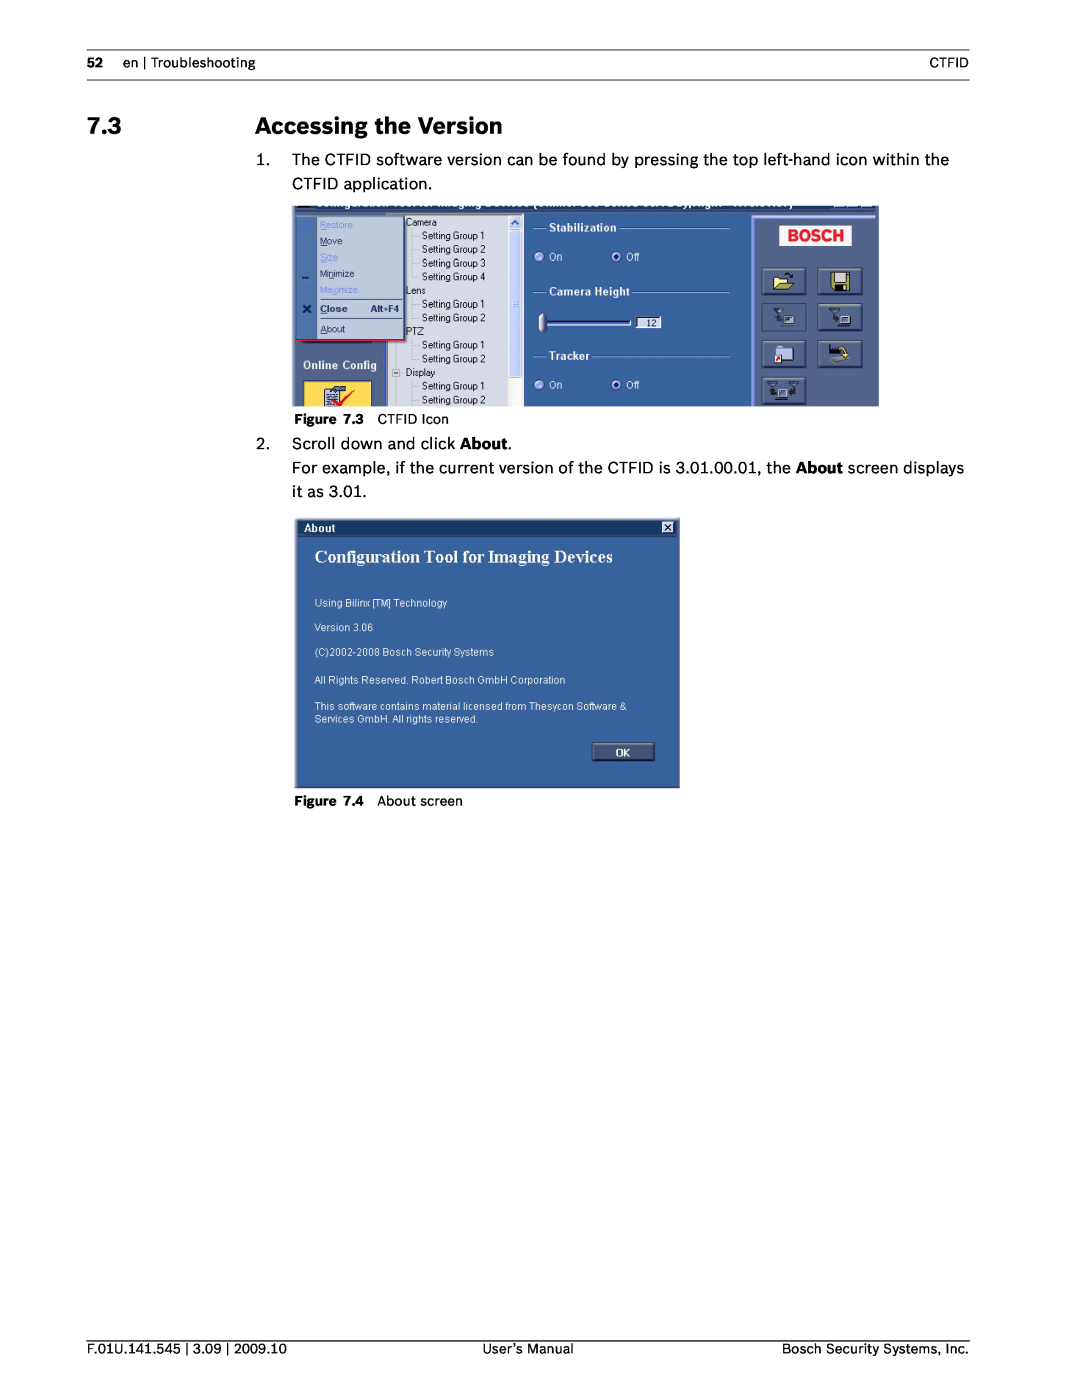 Bosch Appliances VP-CFGSFT user manual 7.3Accessing the Version 